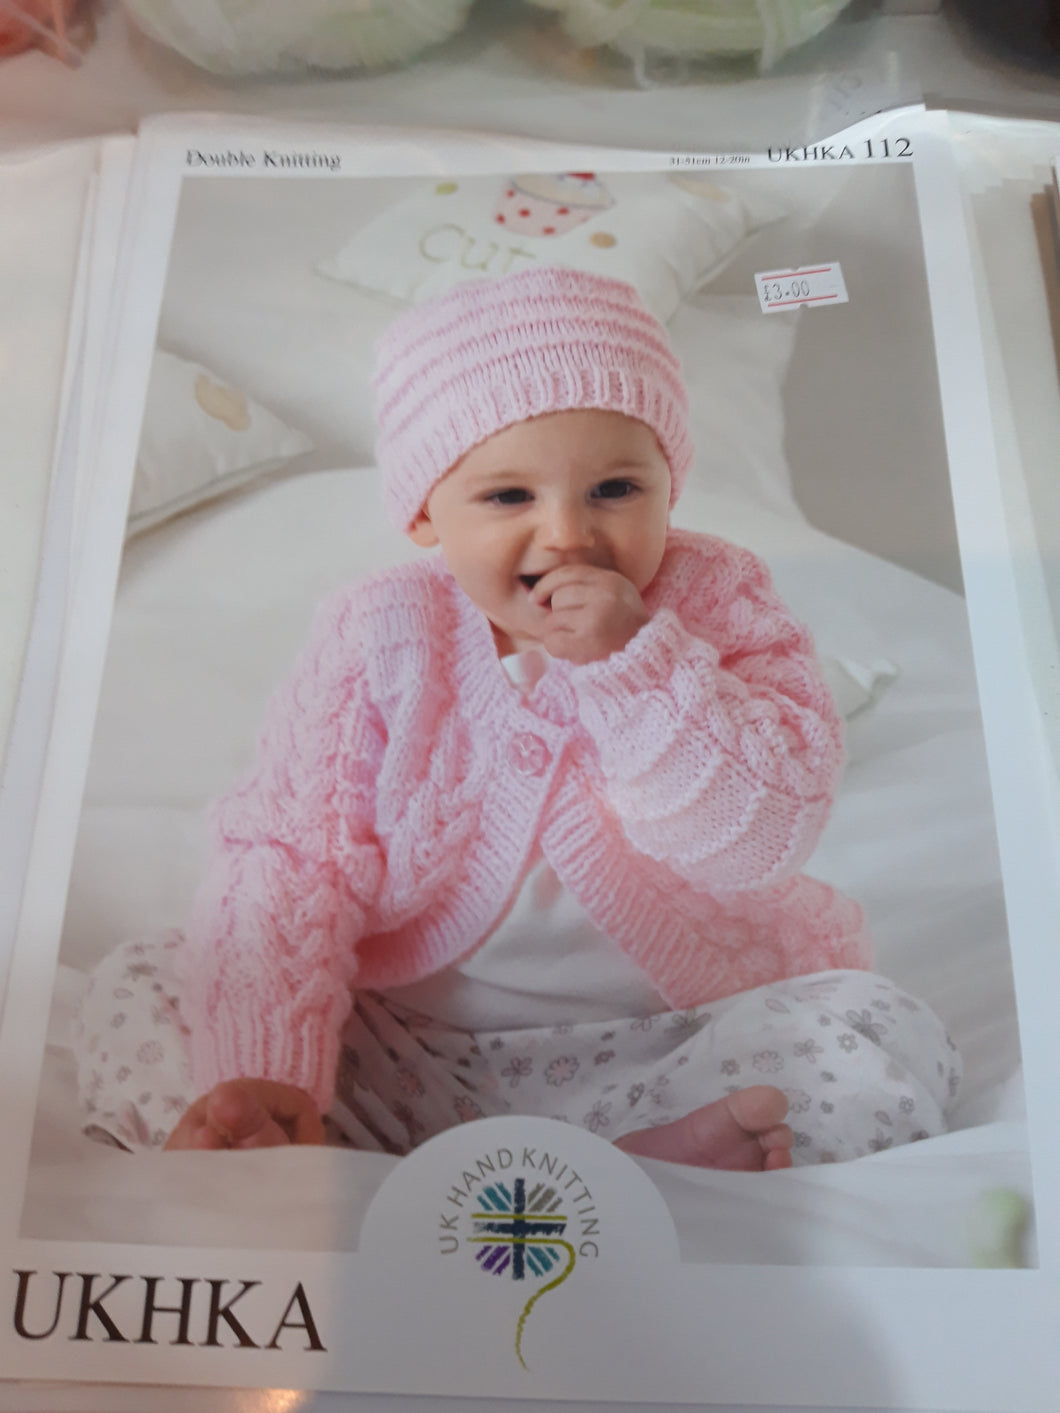 UKHKA 112 - Baby Double Knit - Cardigan, Hat and Blanket - 12